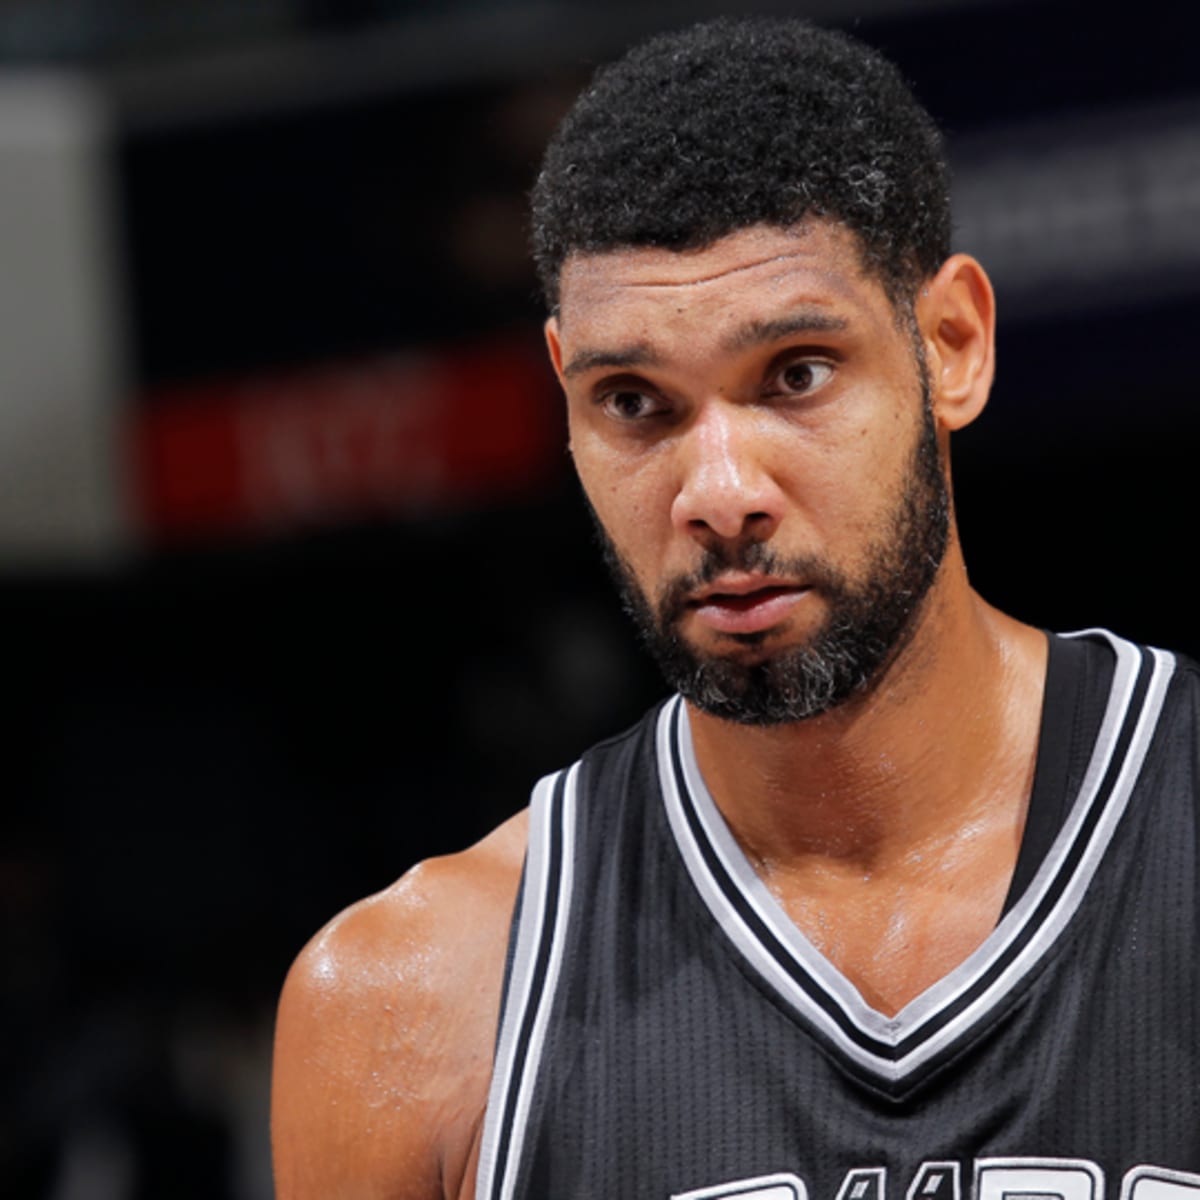 It's sad to see Tim Duncan go out like this